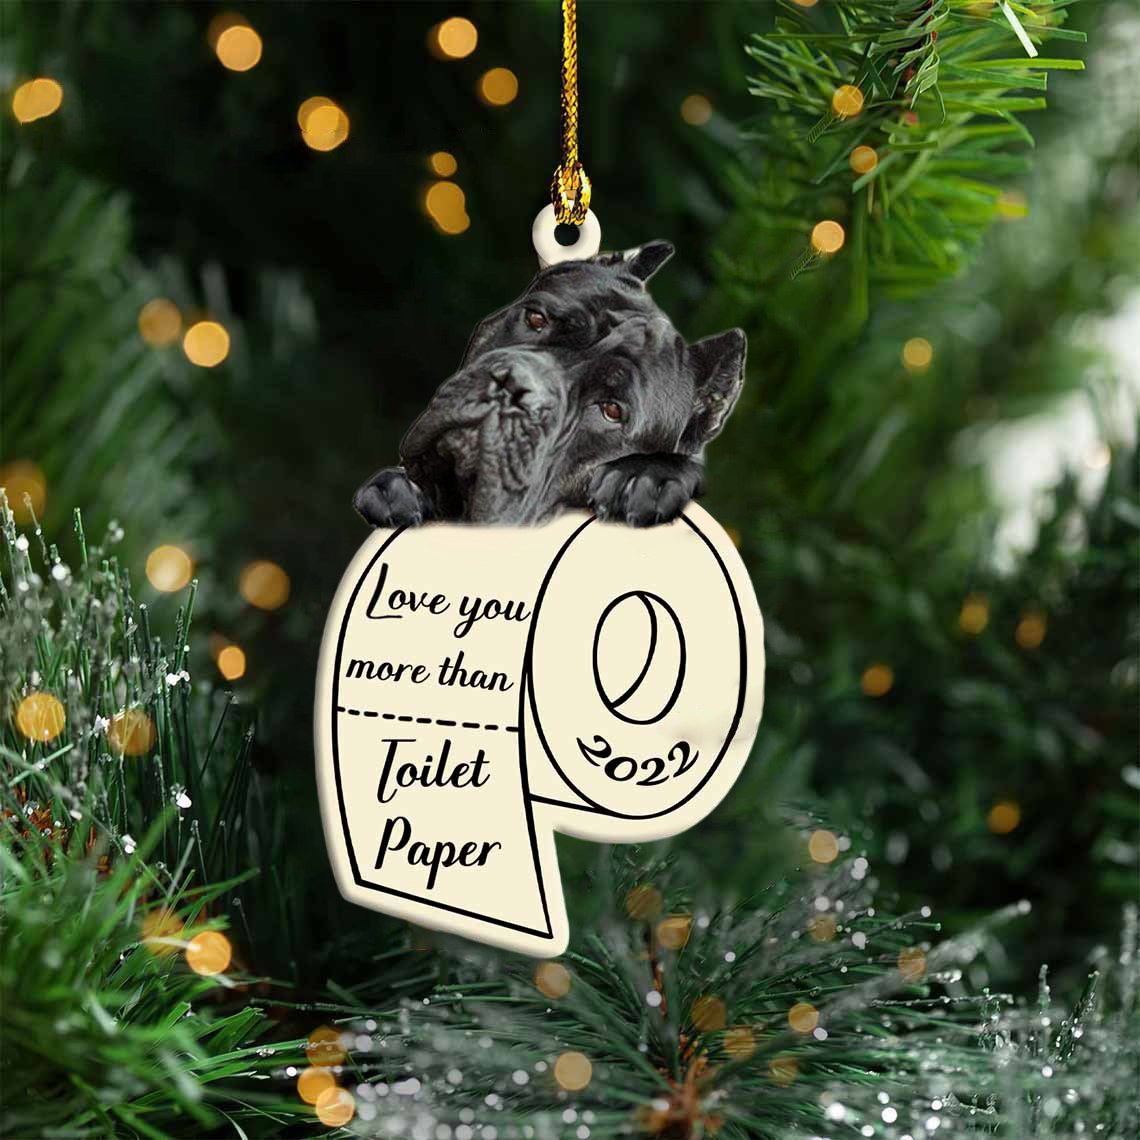 Cane Corso Love You More Than Toilet Paper 2022 Hanging Ornament